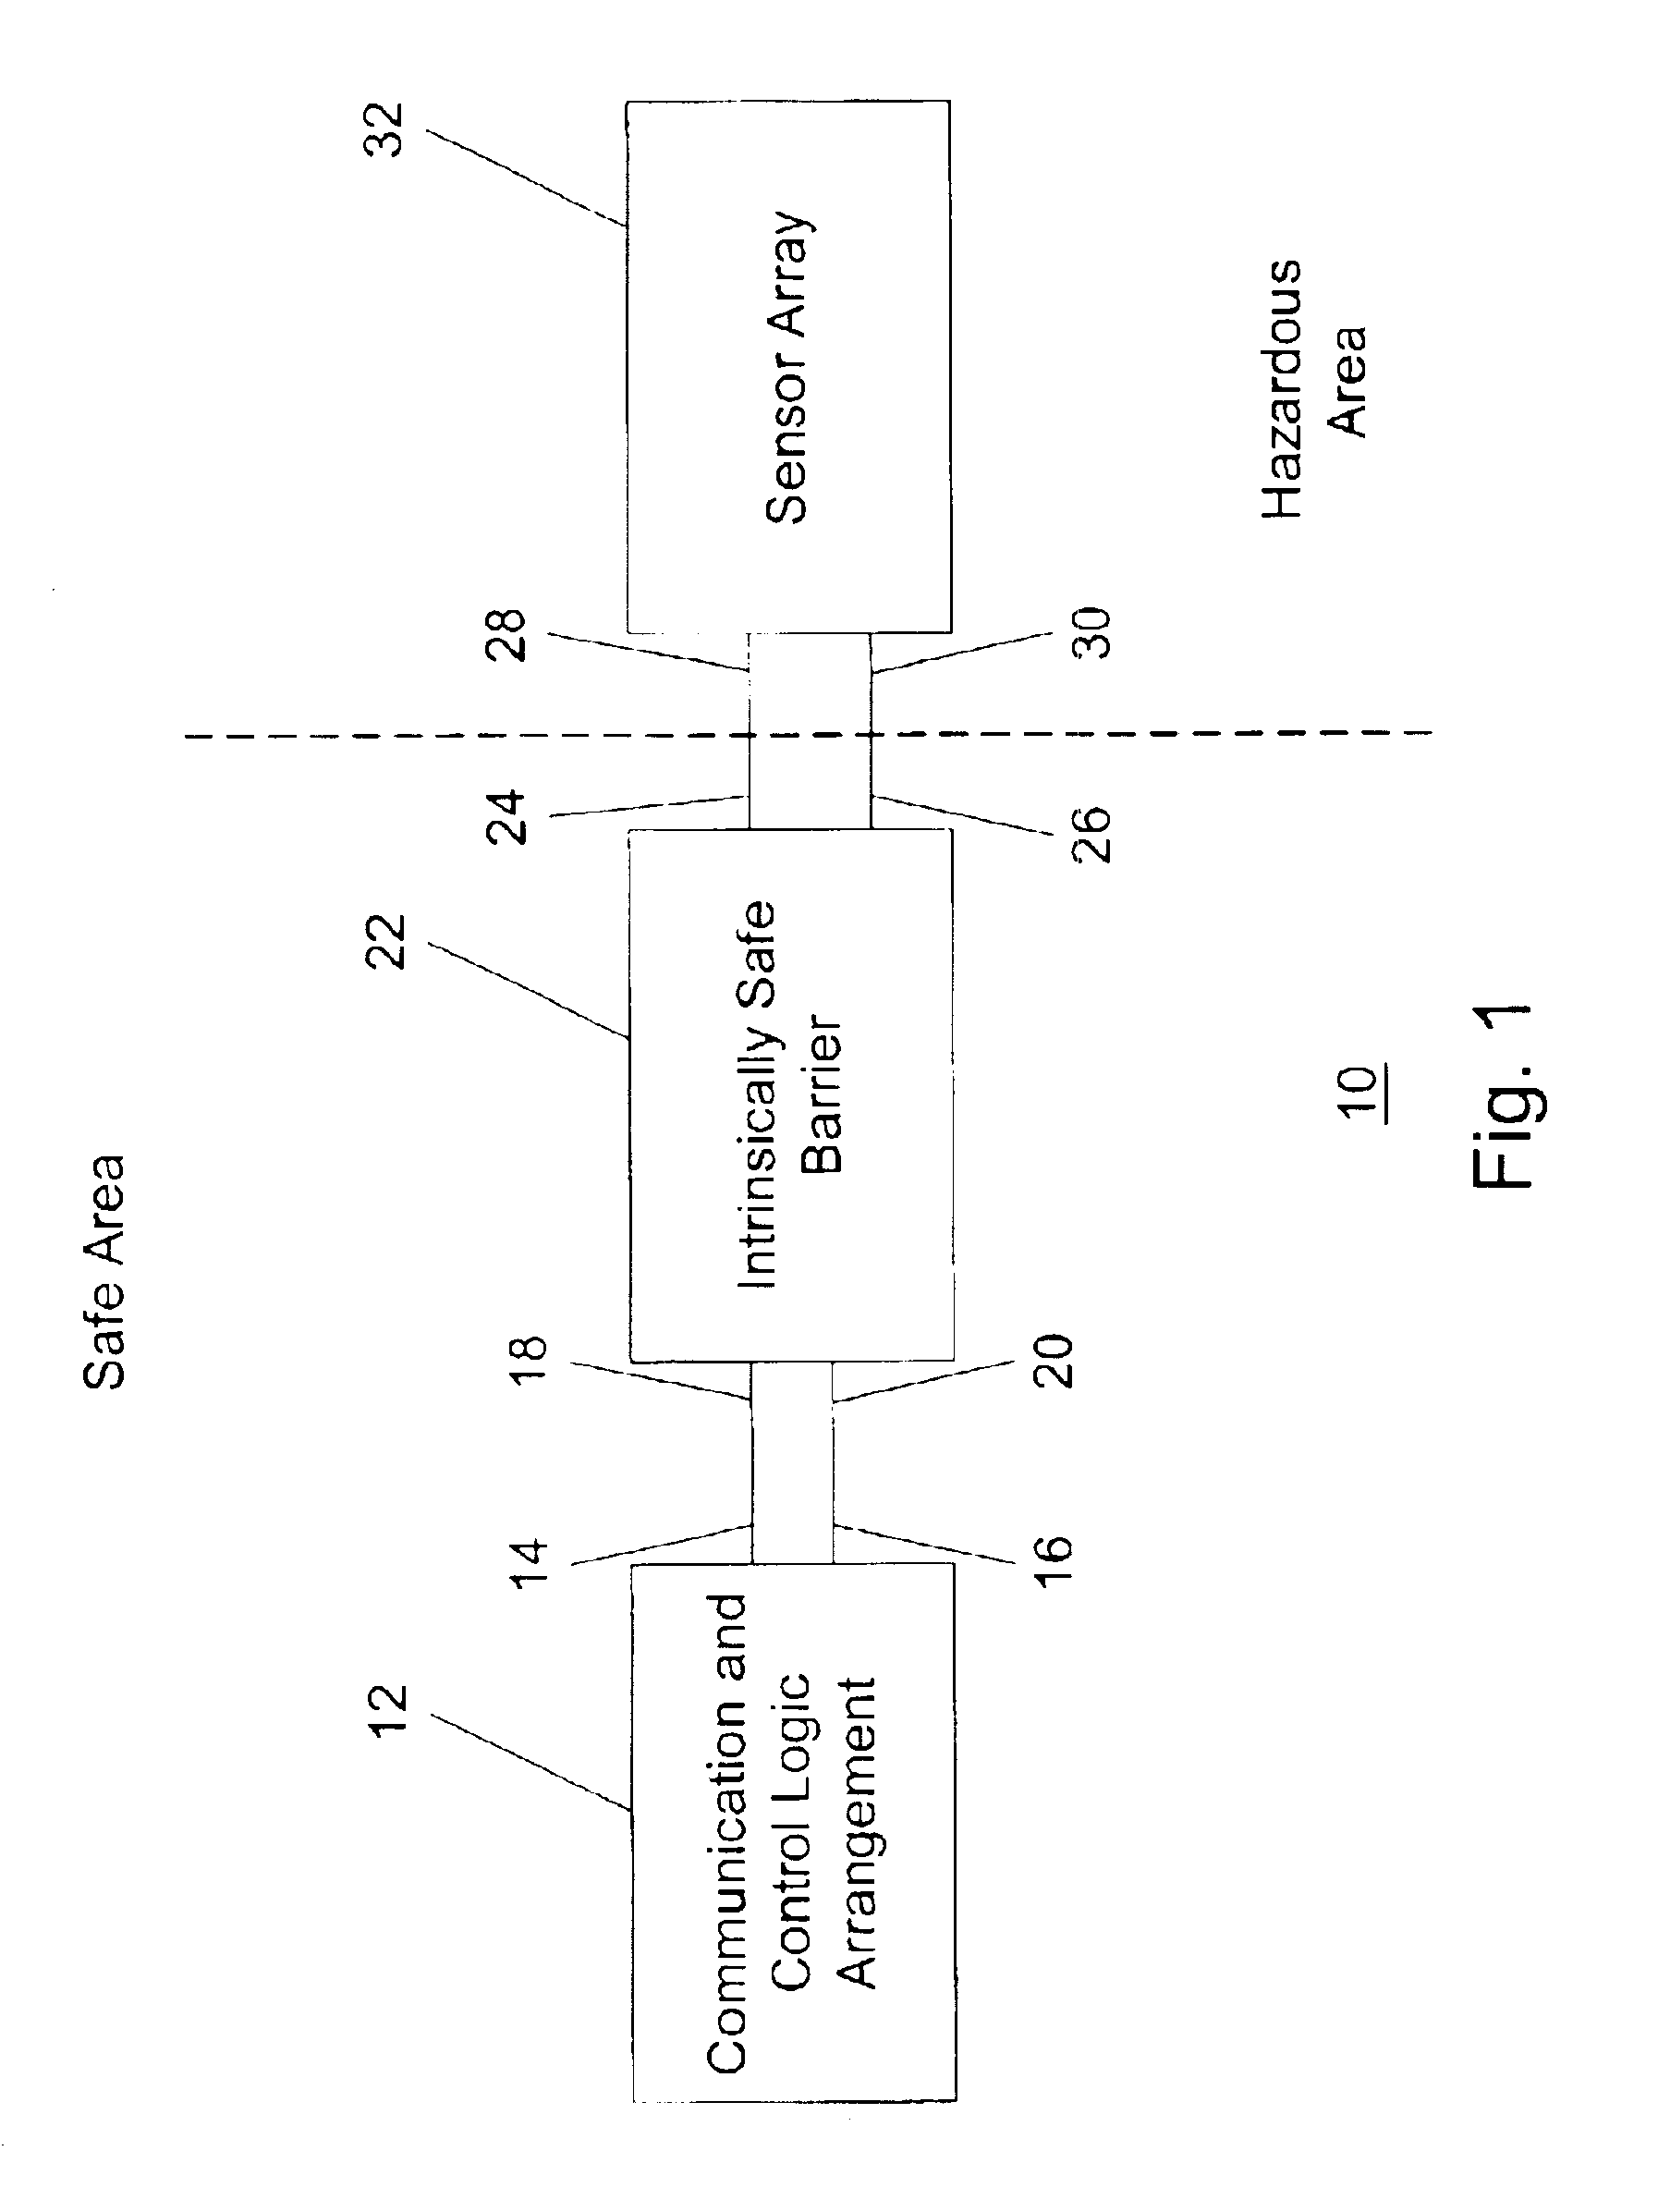 System and method for measuring system parameters and process variables using multiple sensors which are isolated by an intrinsically safe barrier